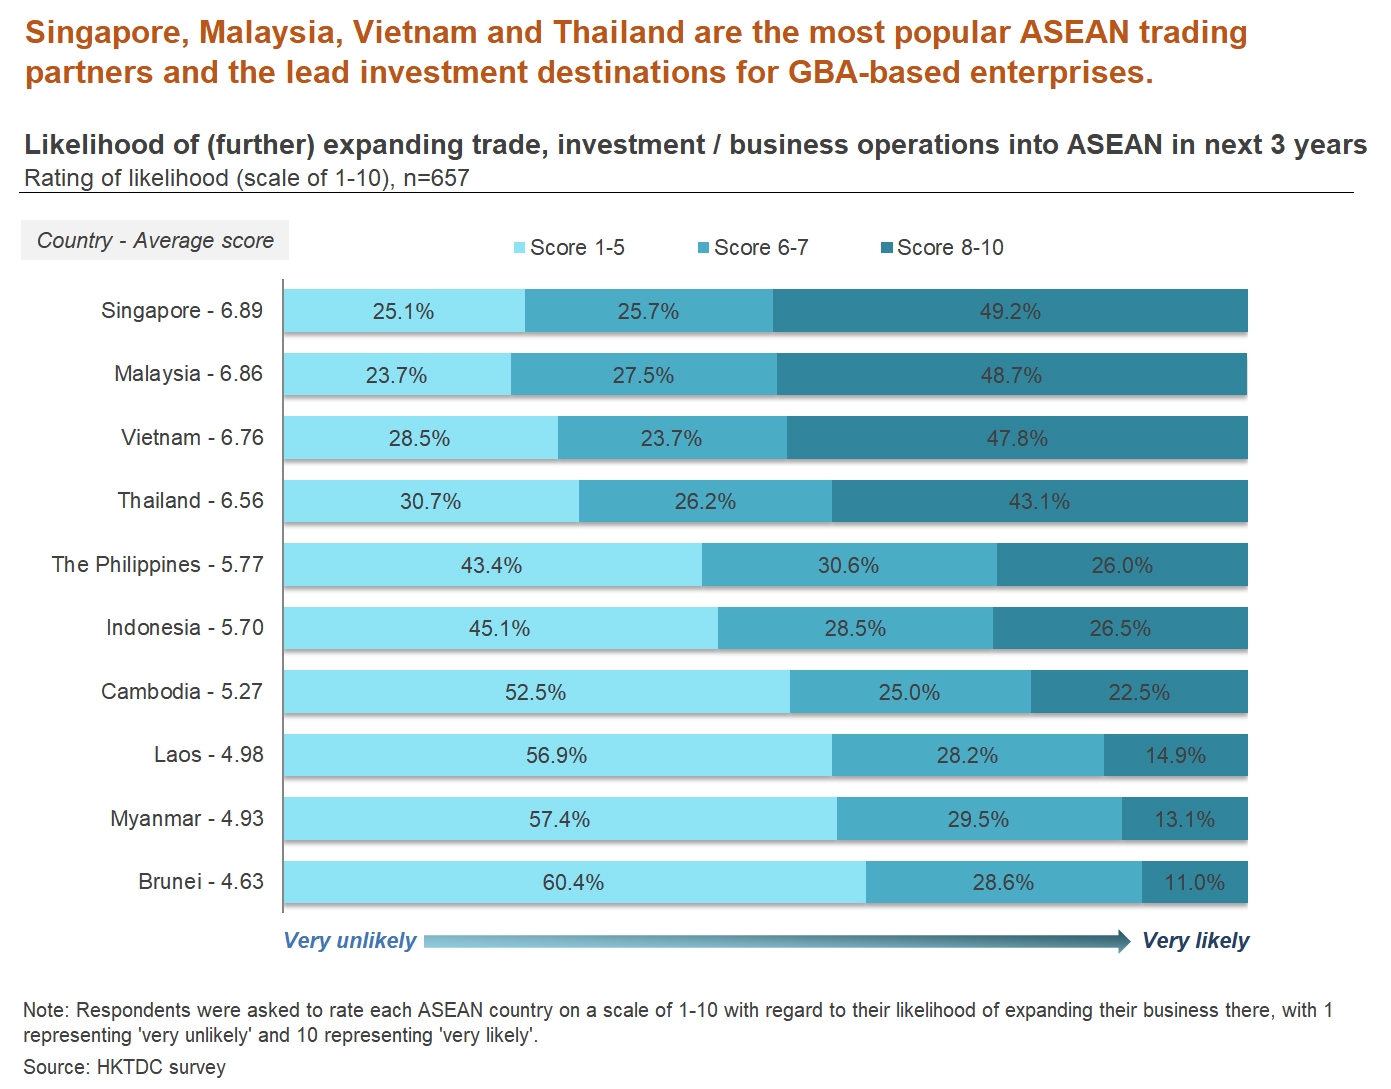 Chart: Likelihood of (further) expanding trade, investment / business operations into ASEAN in next 3 years